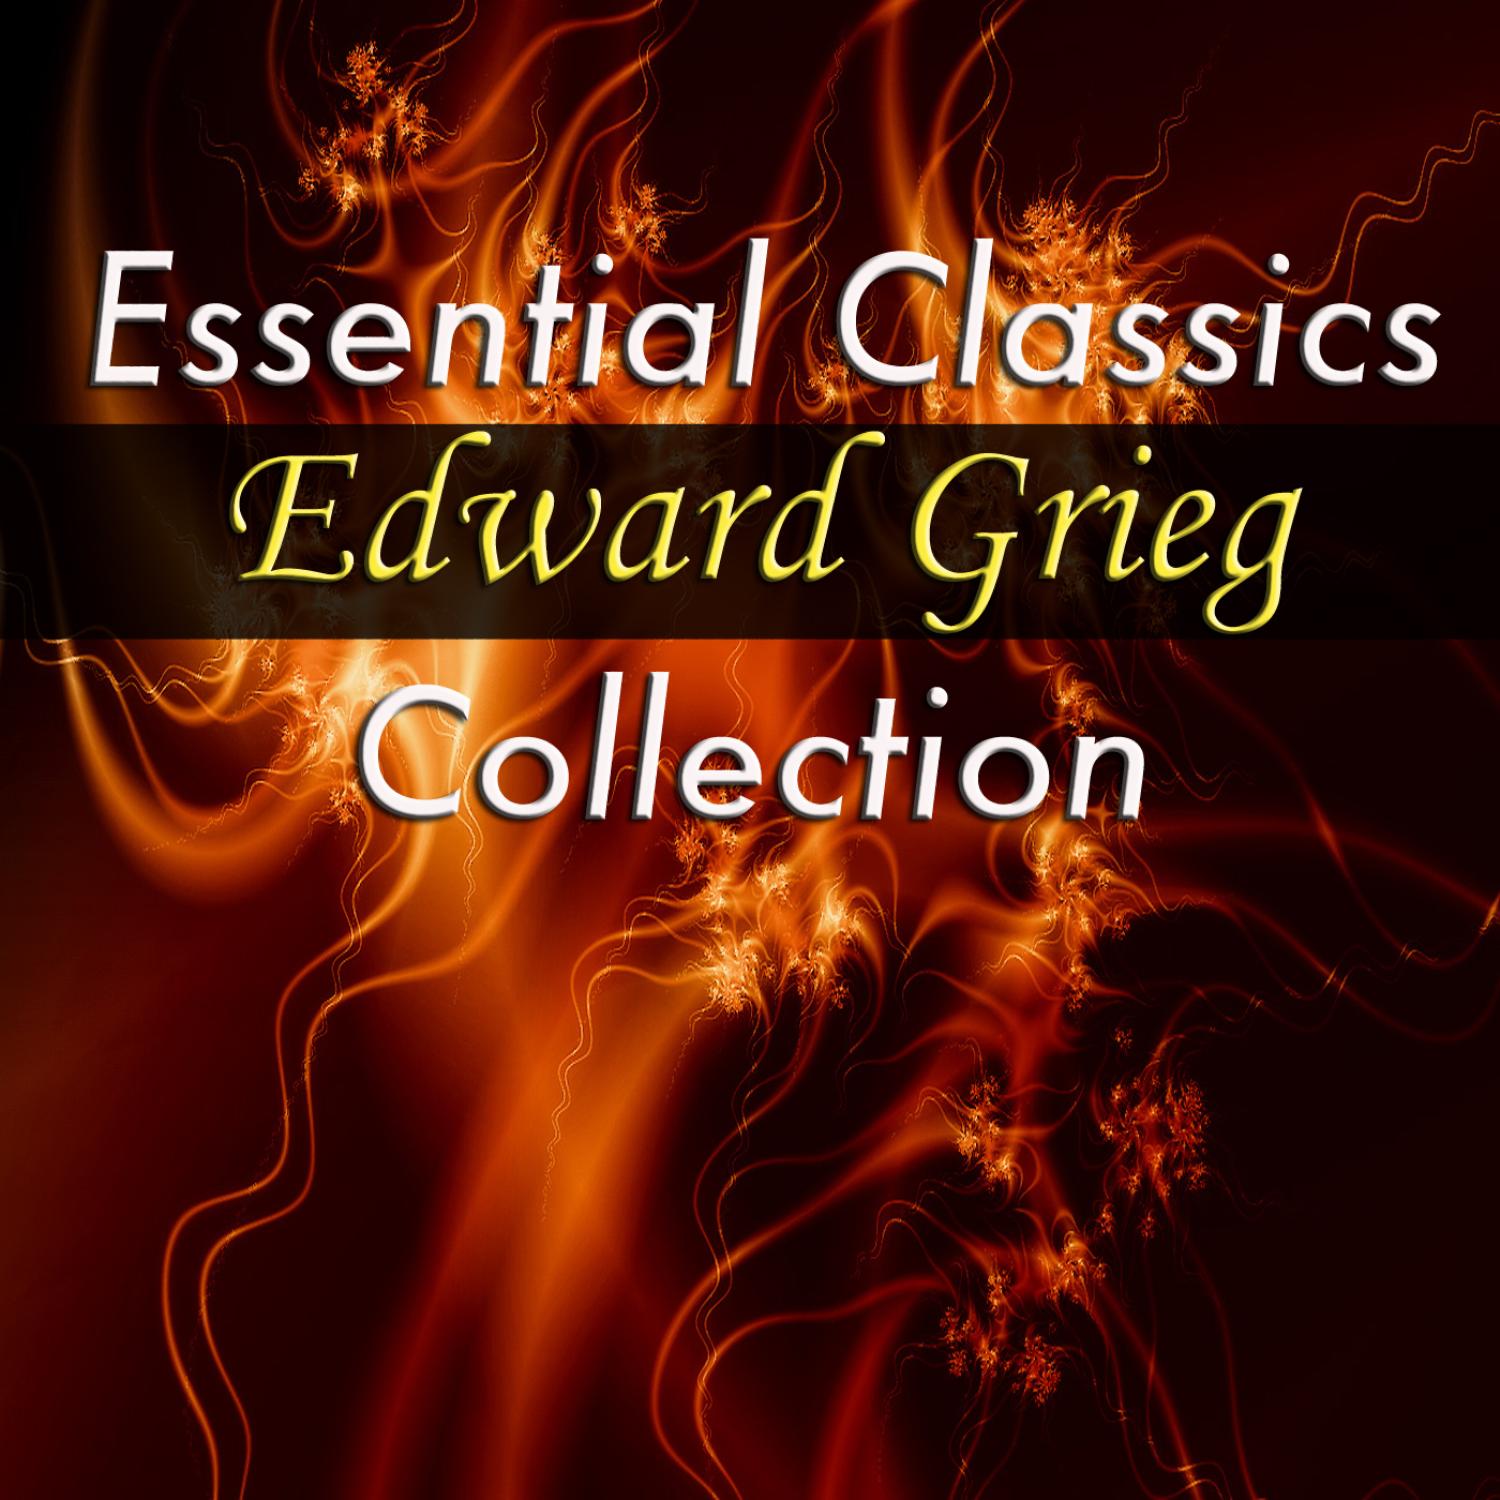 Essential Classics - Edvard Grieg Collection